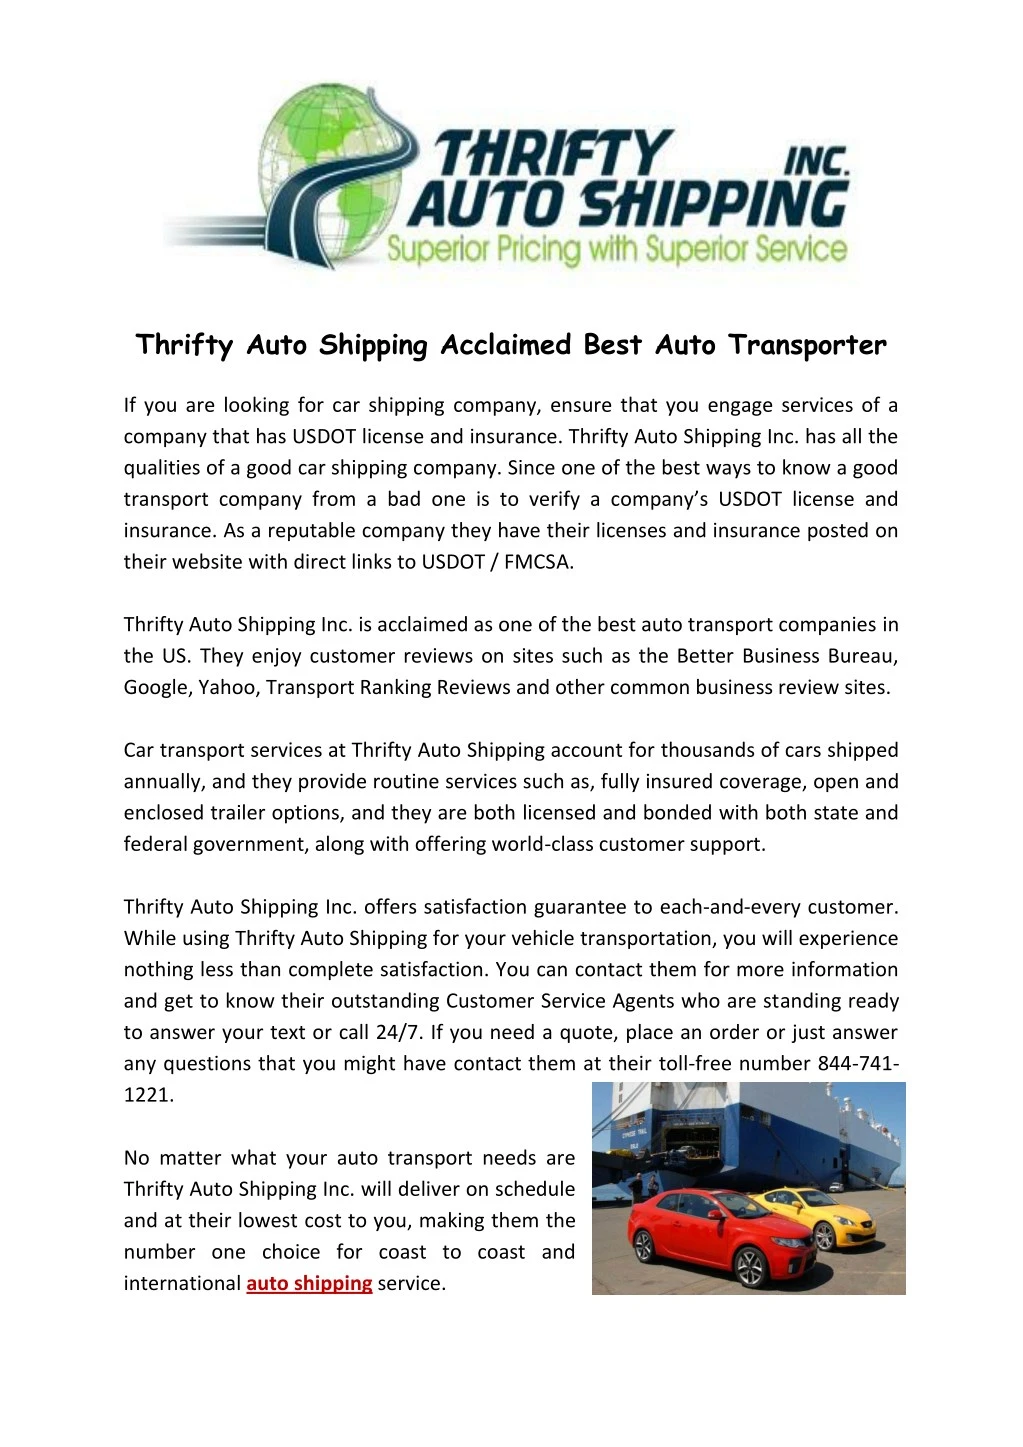 thrifty auto shipping acclaimed best auto